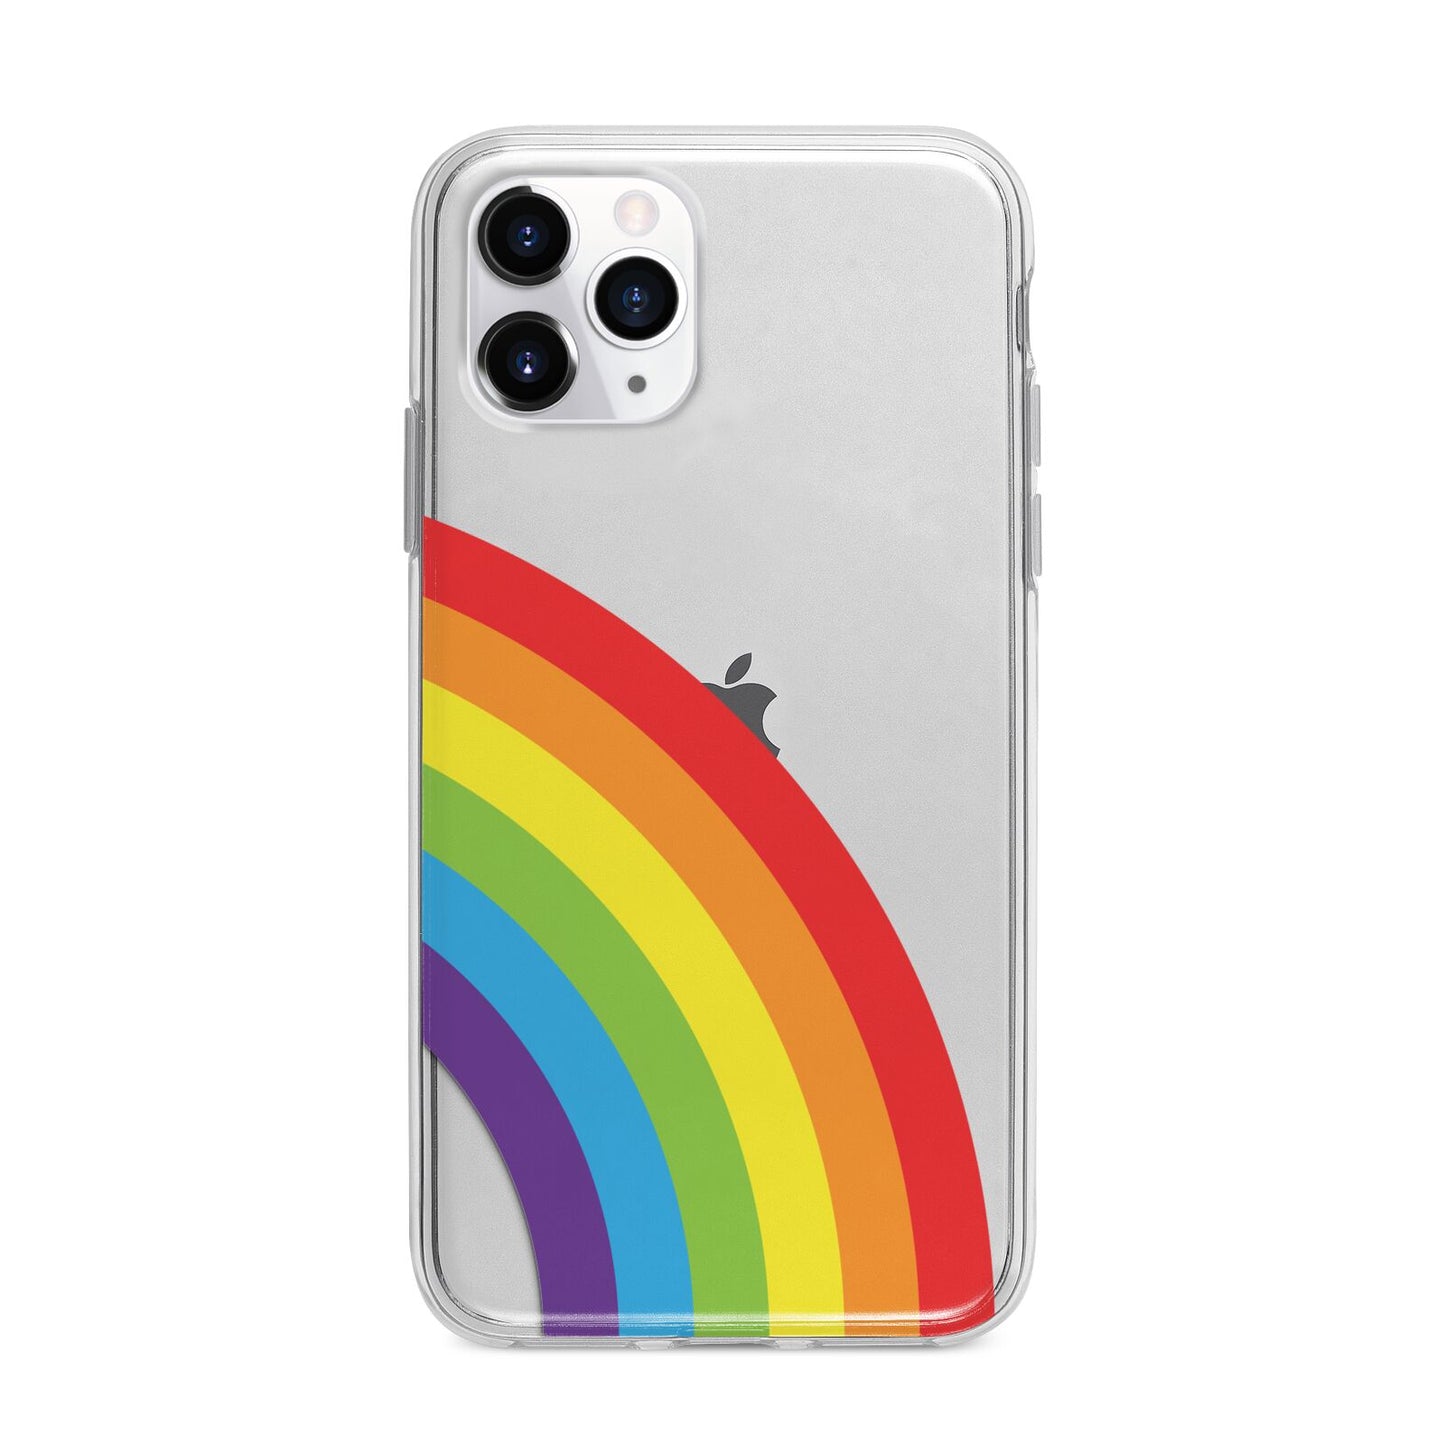 Large Rainbow Apple iPhone 11 Pro in Silver with Bumper Case